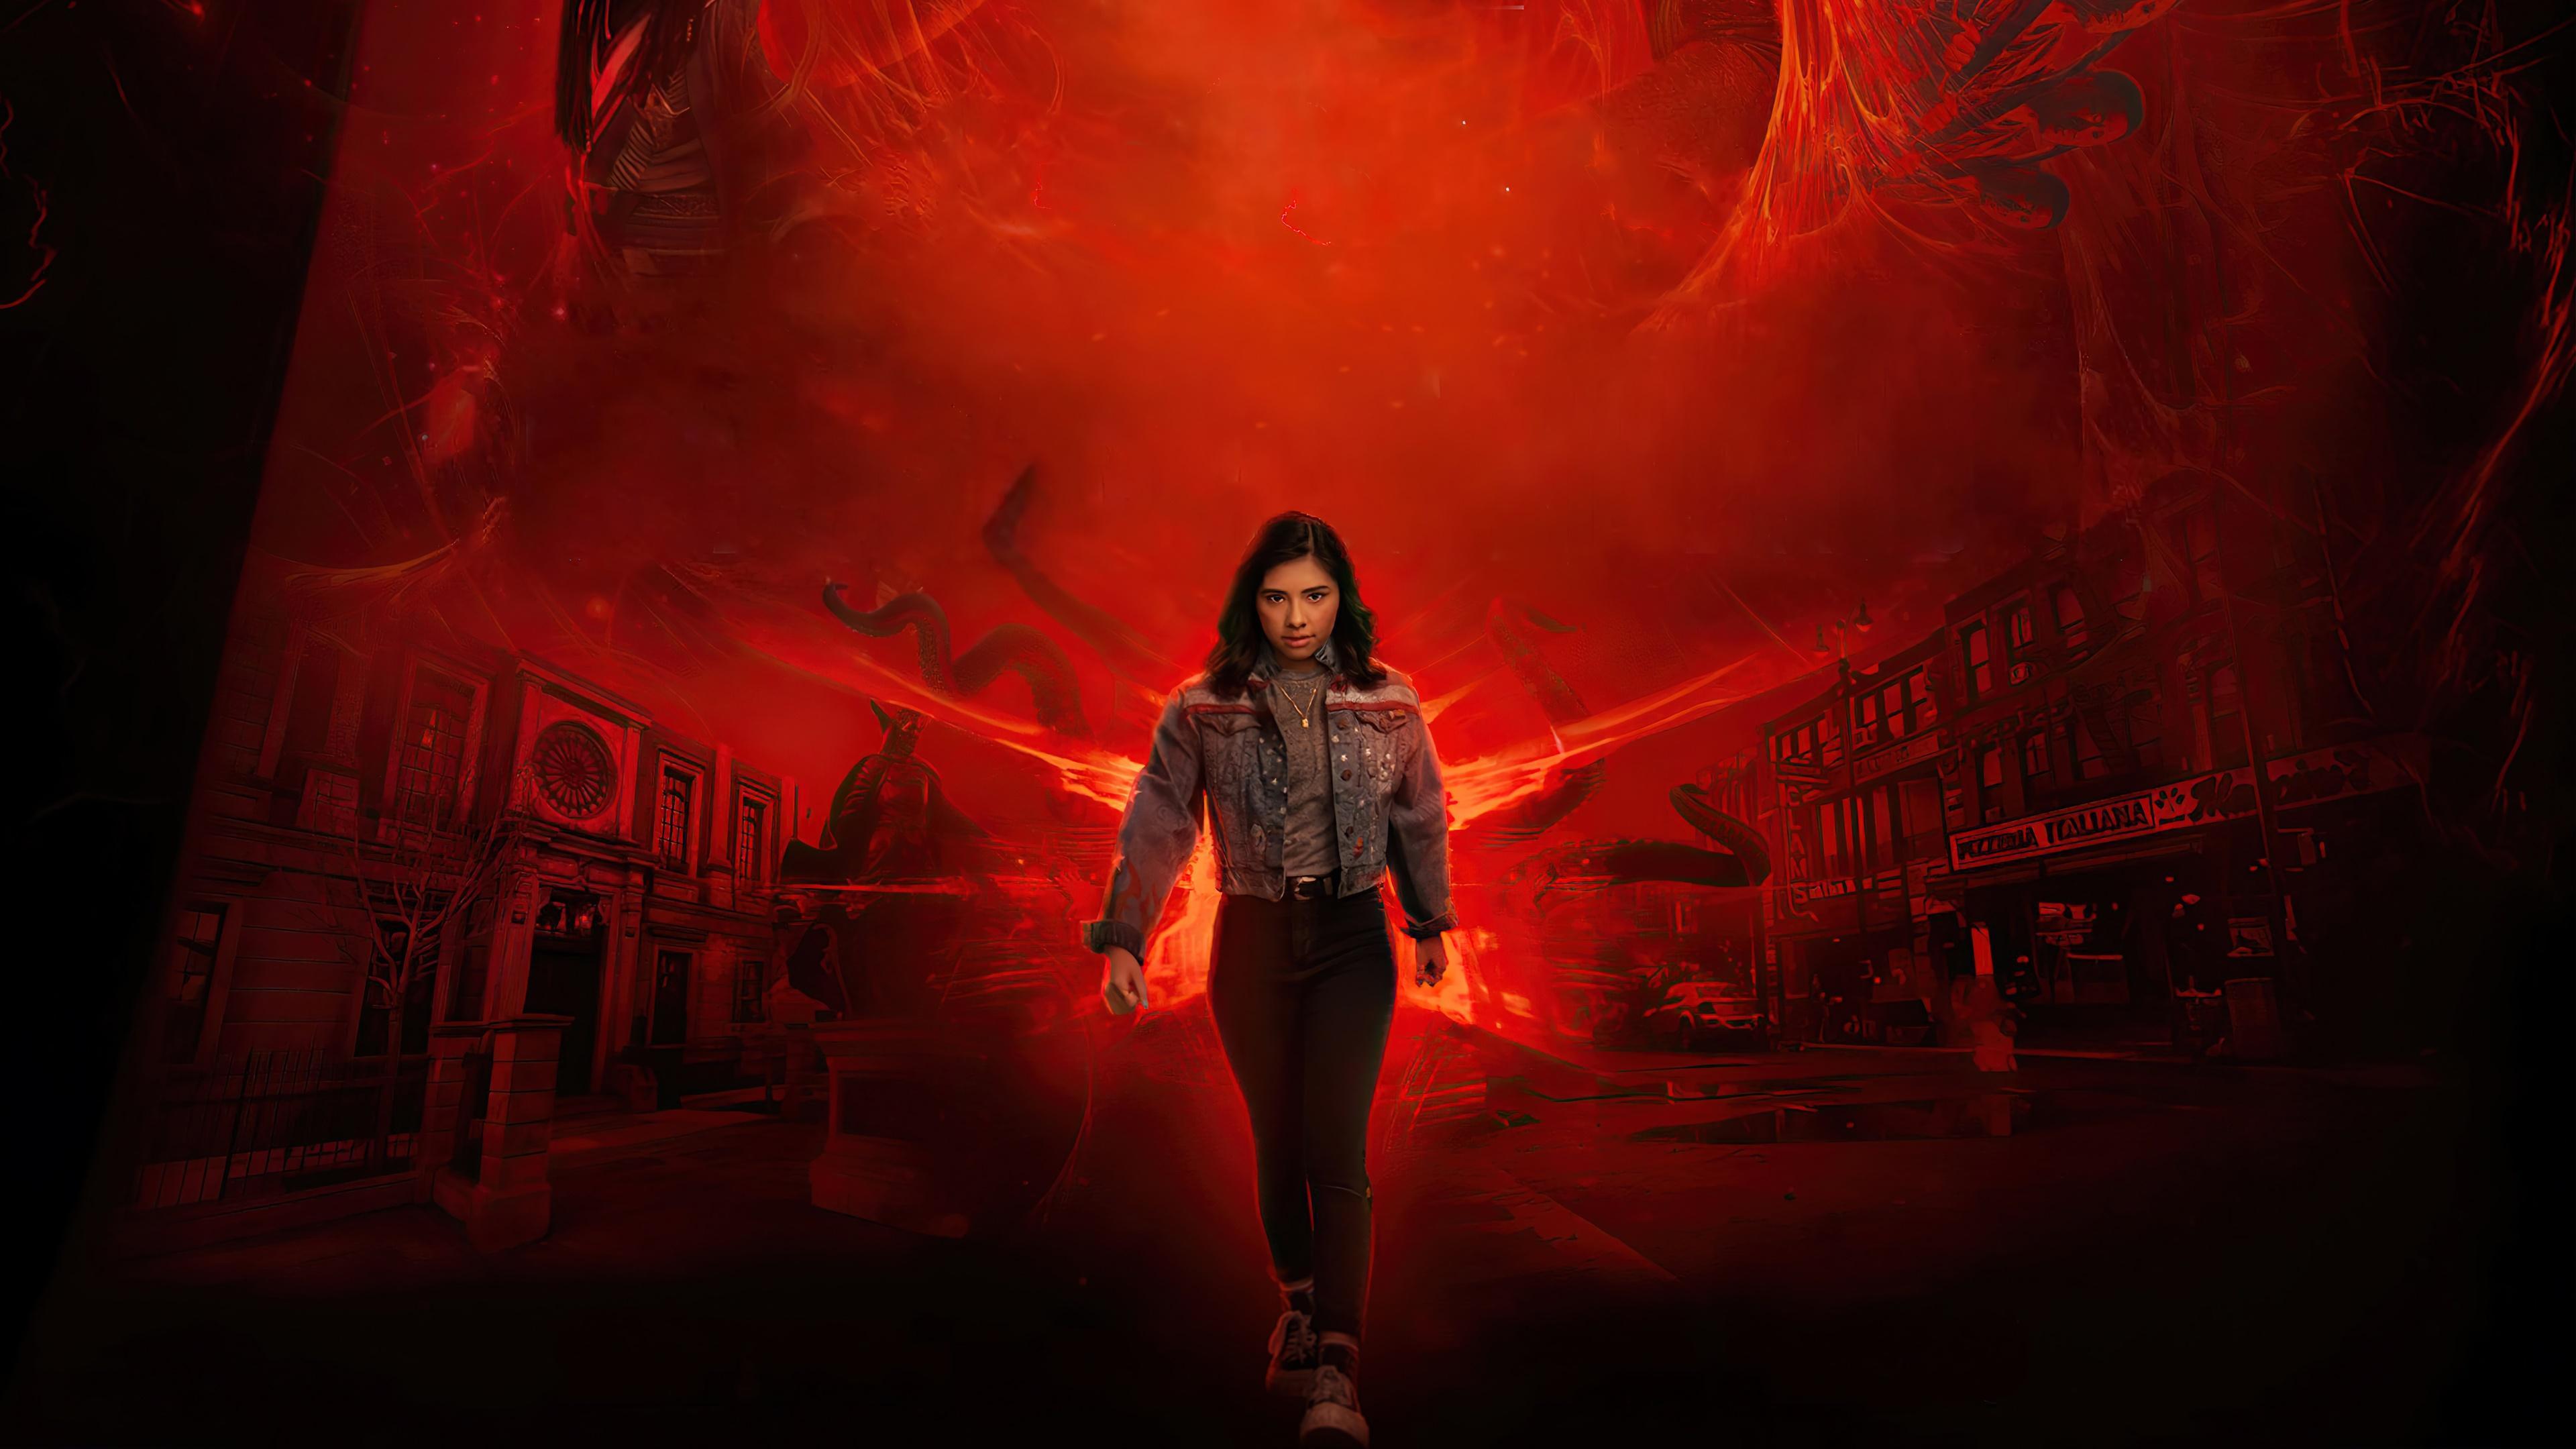 HD wallpaper, Doctor Strange In The Multiverse Of Madness, America Chavez, Poster, 4K